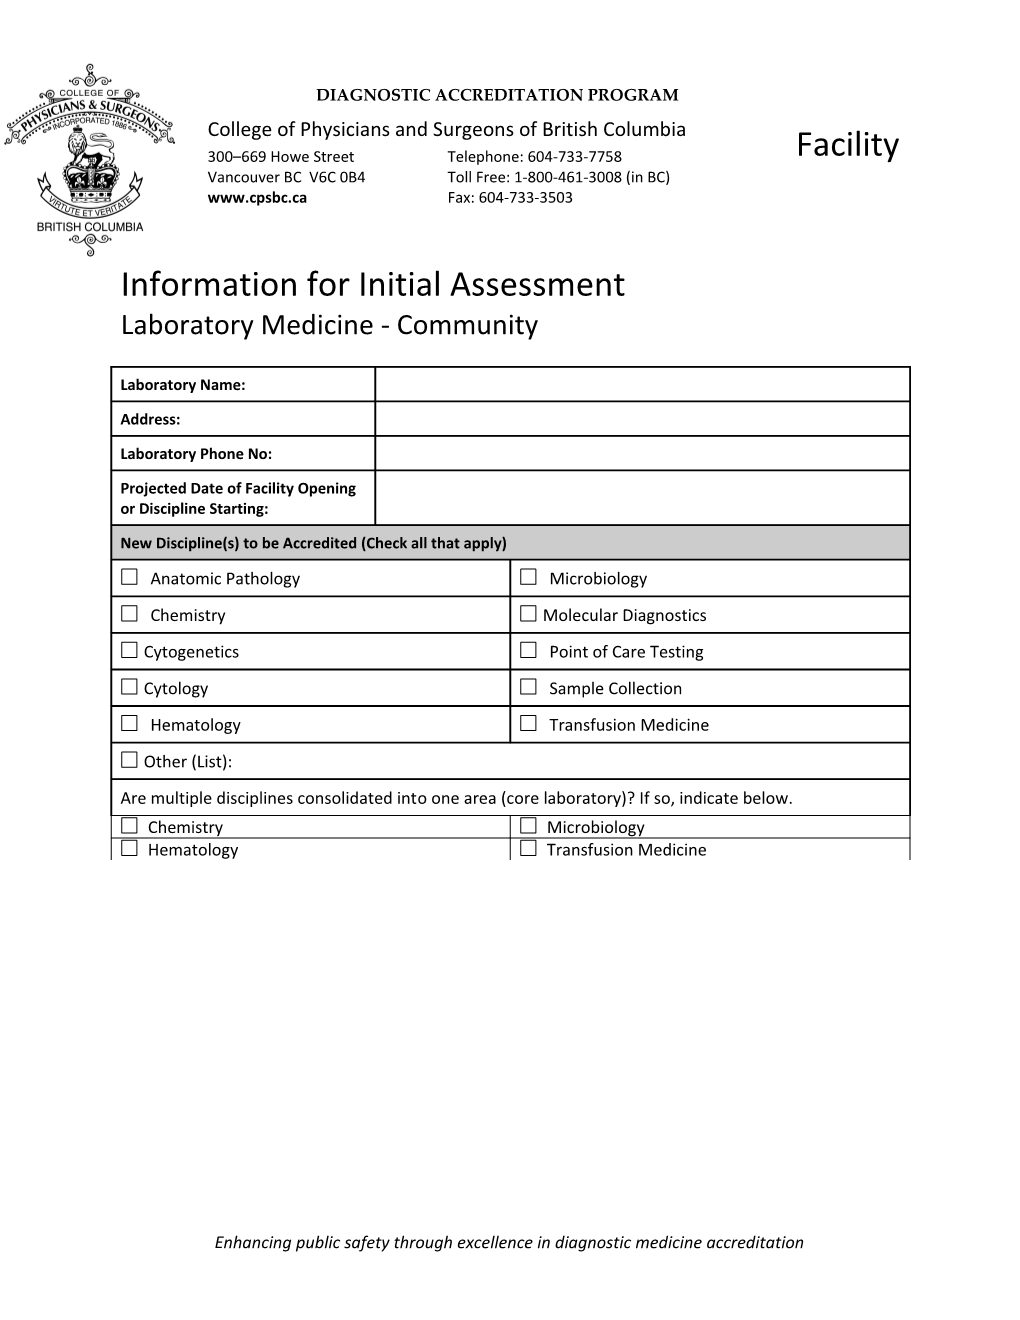 Facility Information for Initial Assessment